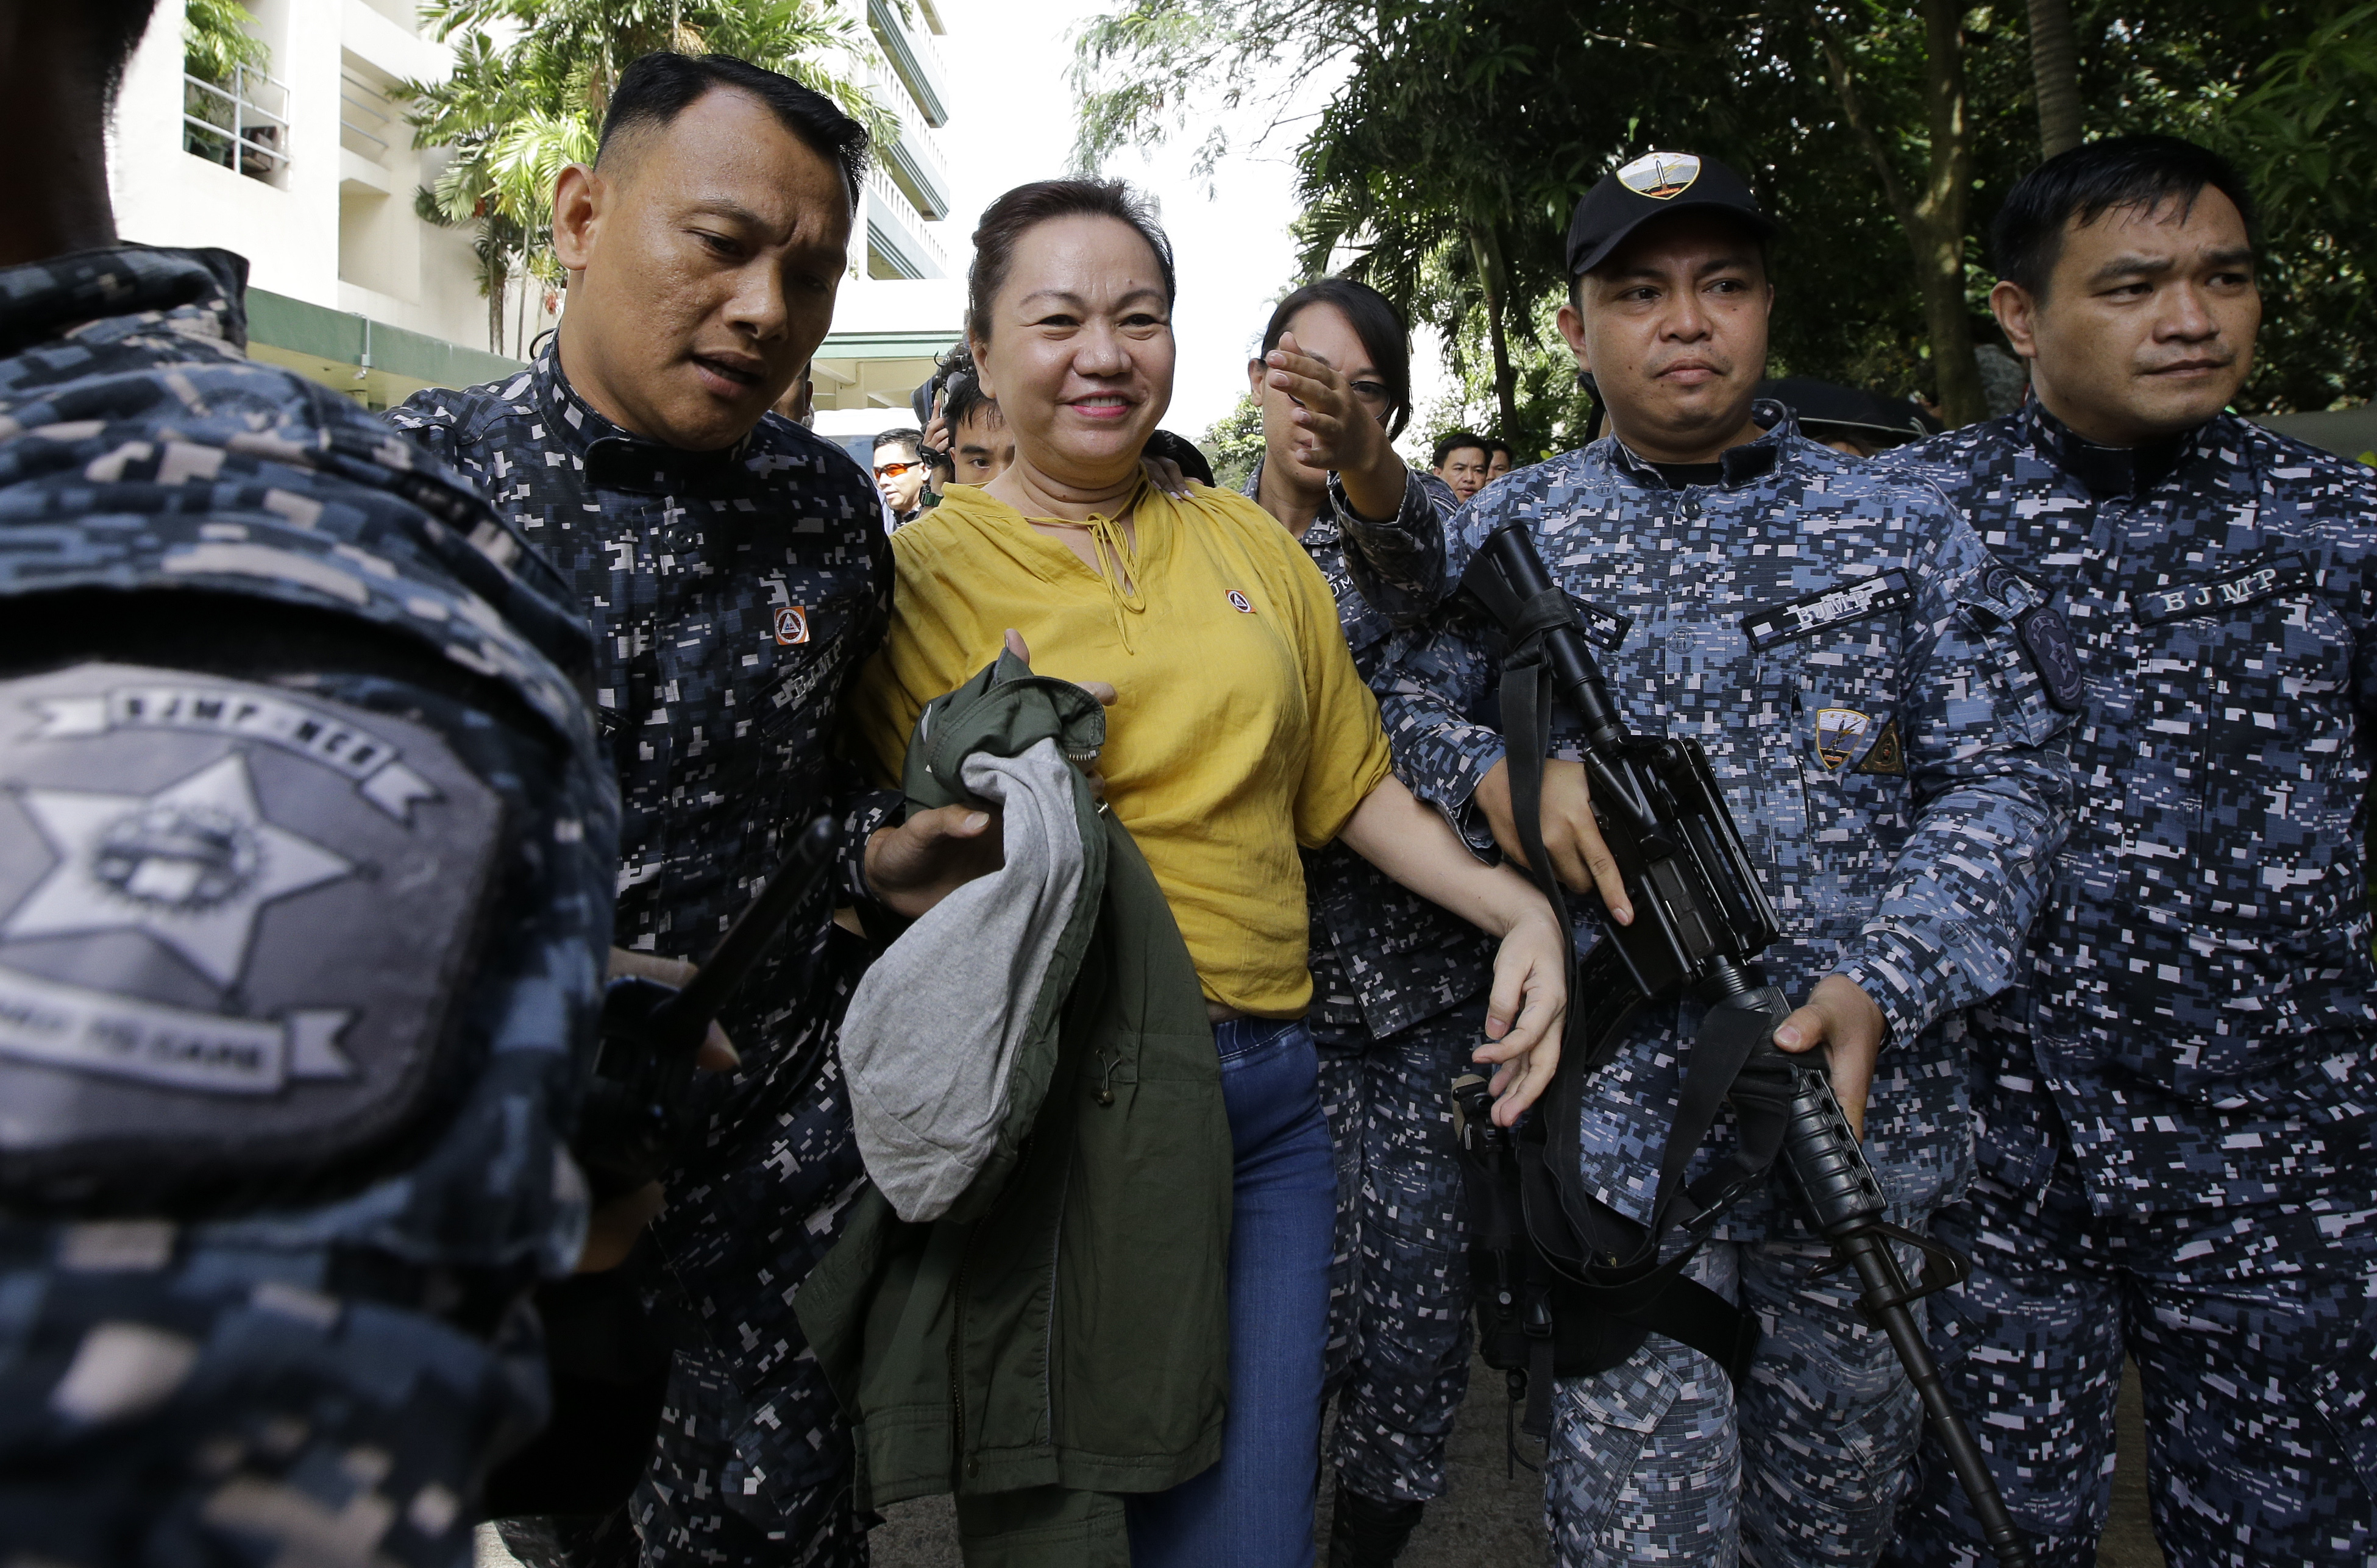 Napoles can now attend hearings after Sandigan receives SC notice